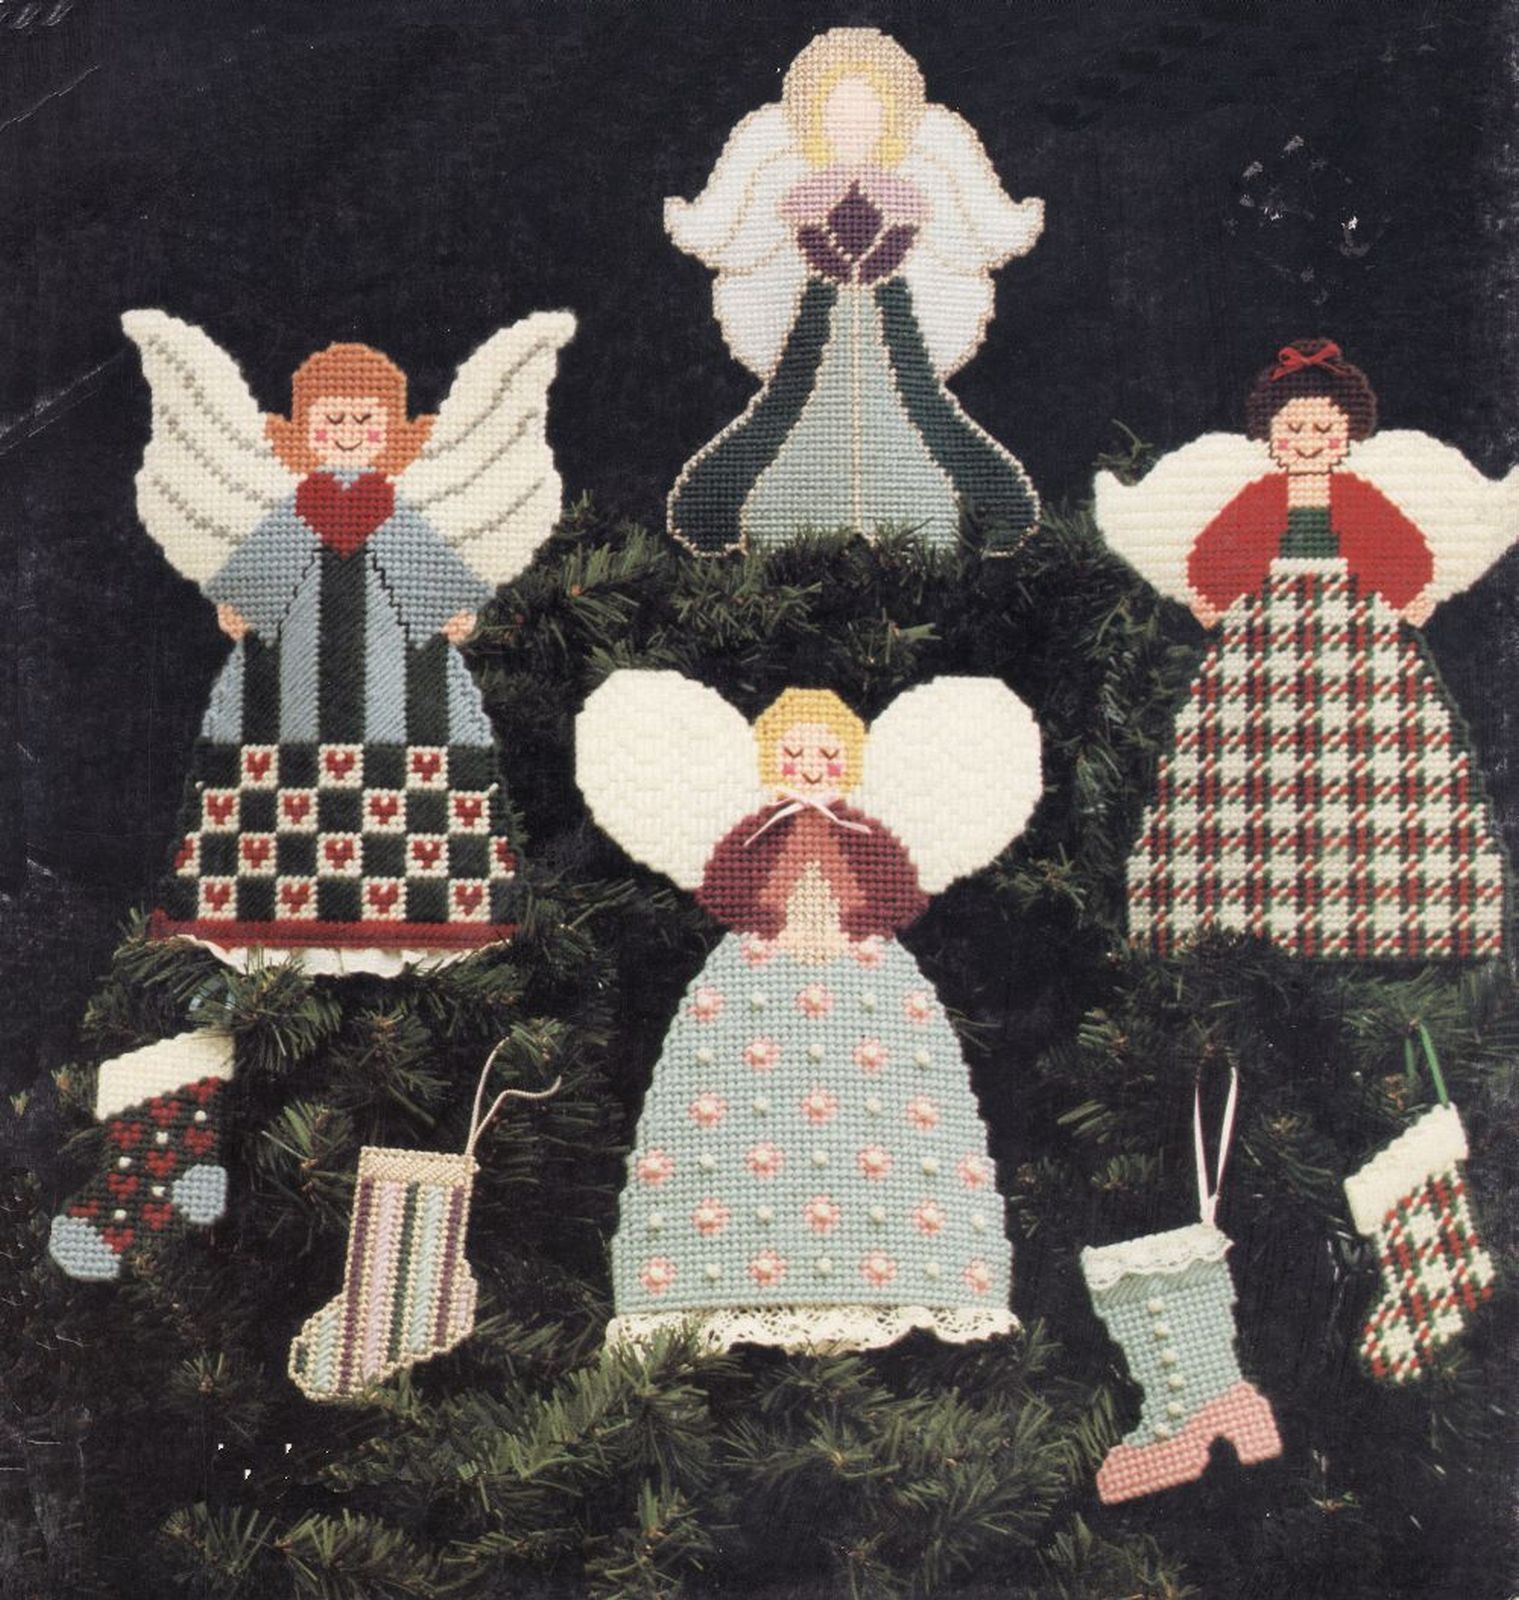 Plastic Canvas Heavenly Angel Tree Top Centerpiece Matching Ornament Patterns - $10.99